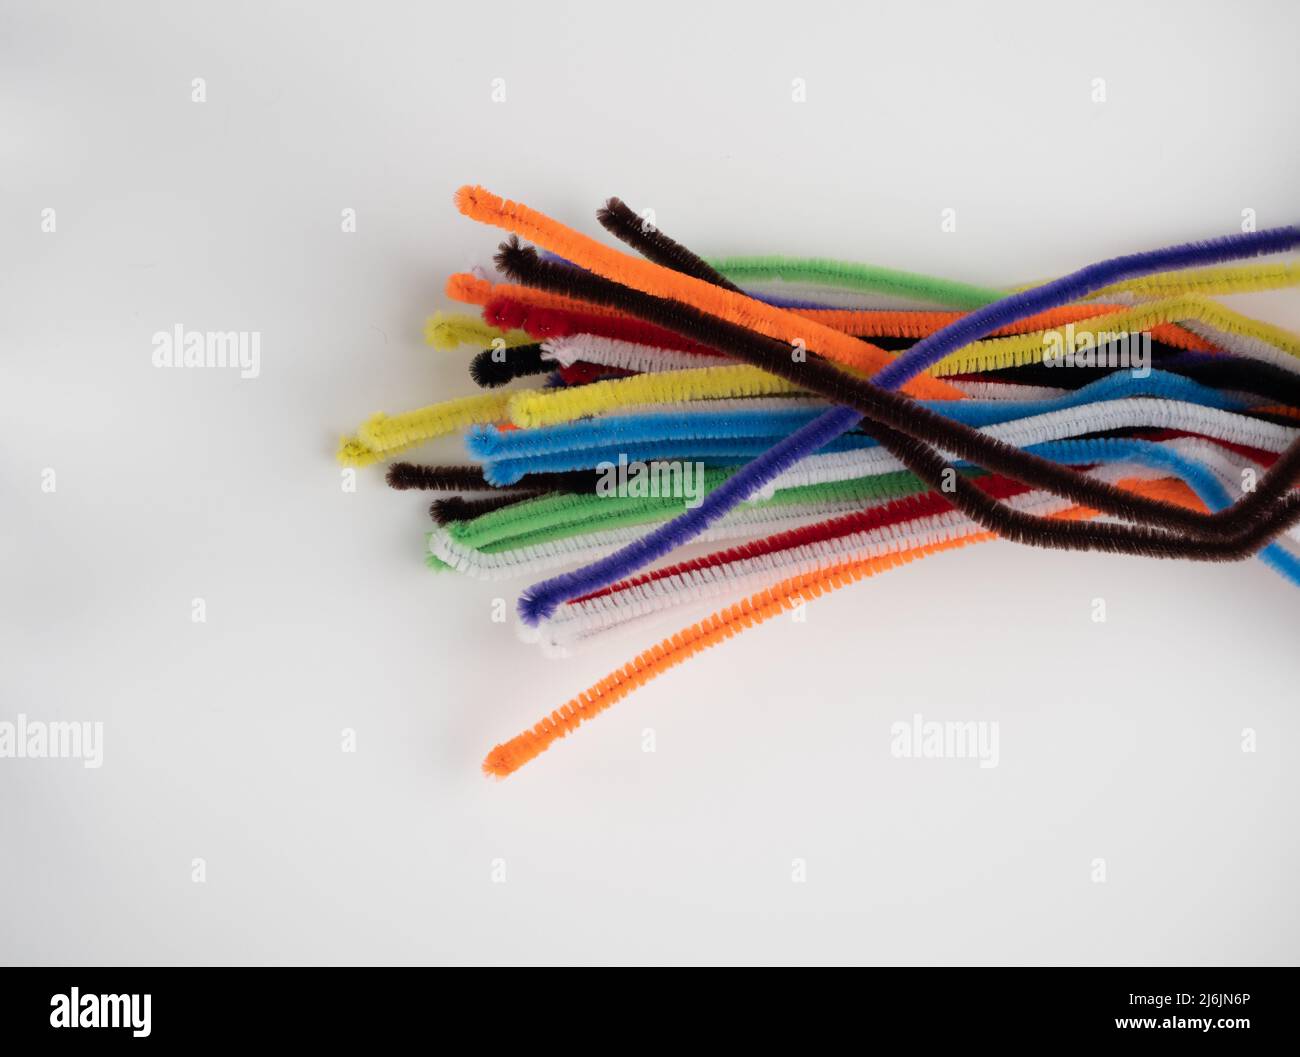 3,946 Pipe Cleaners White Background Images, Stock Photos, 3D objects, &  Vectors